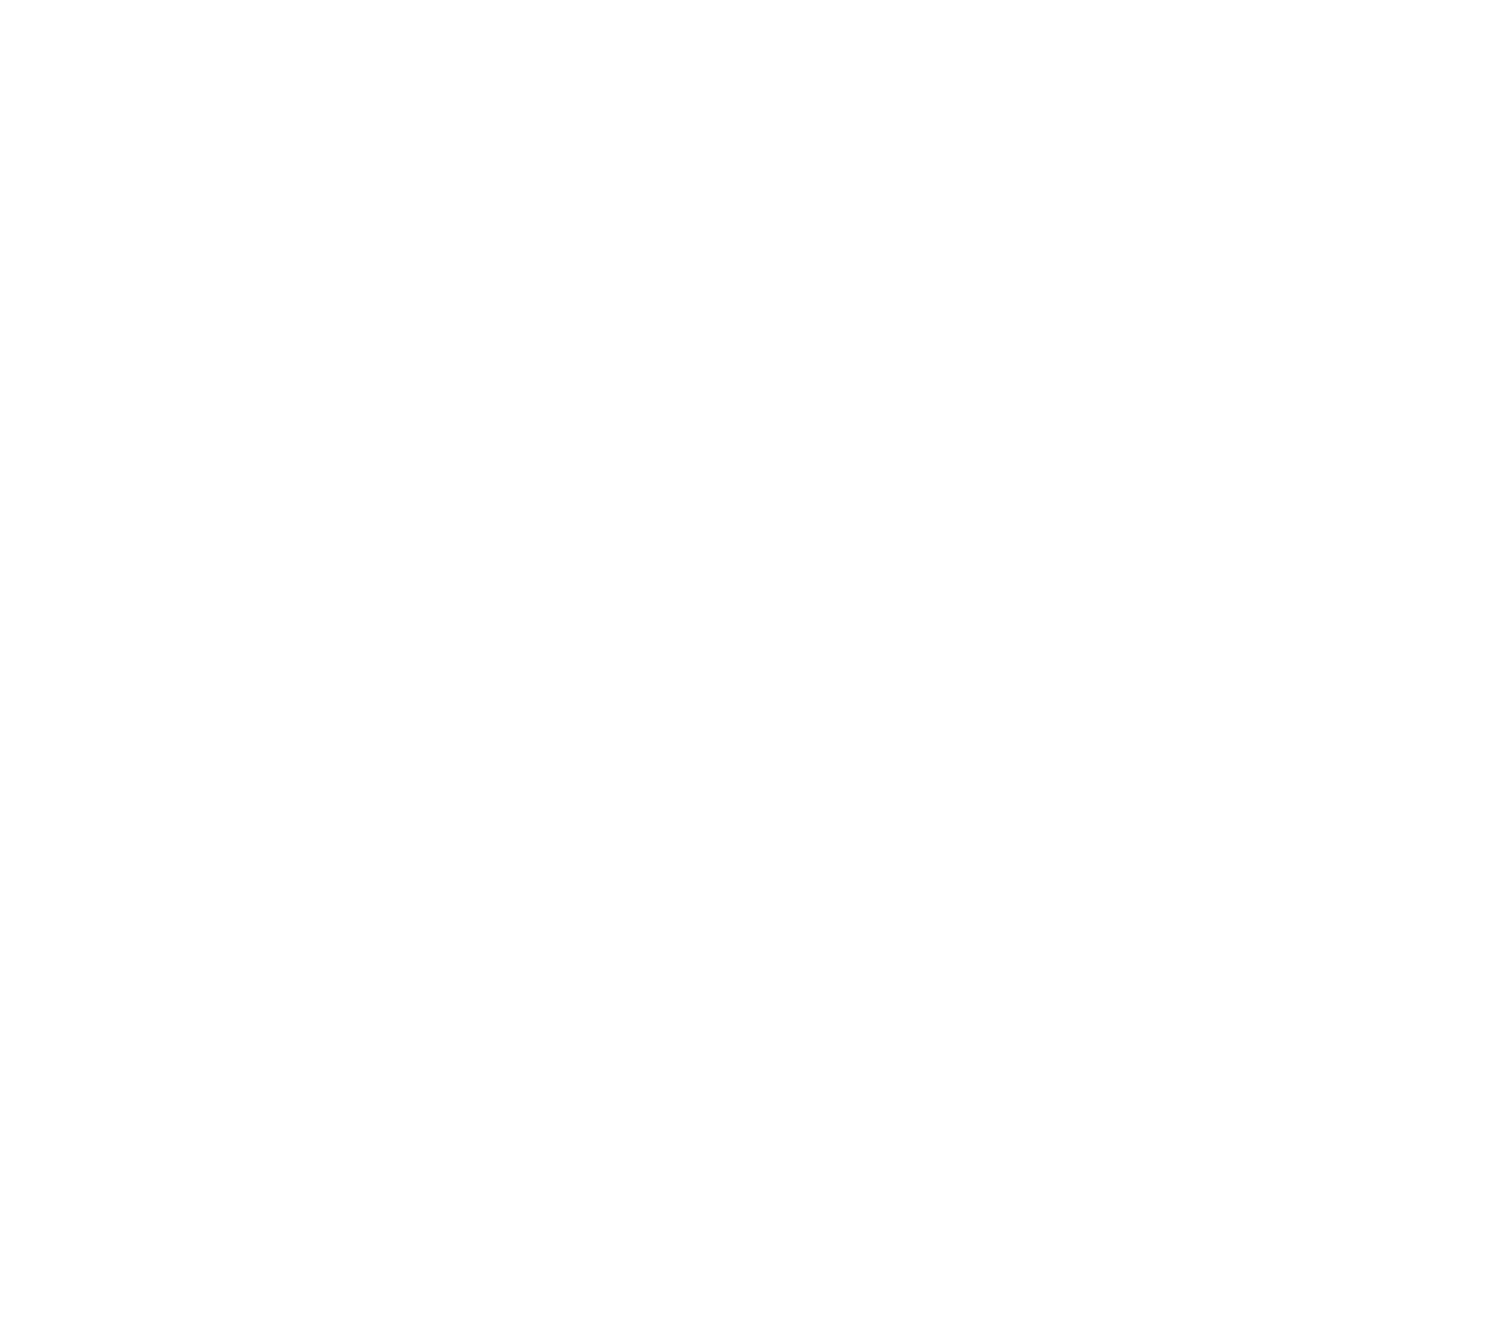 Strides for Equality Equestrians